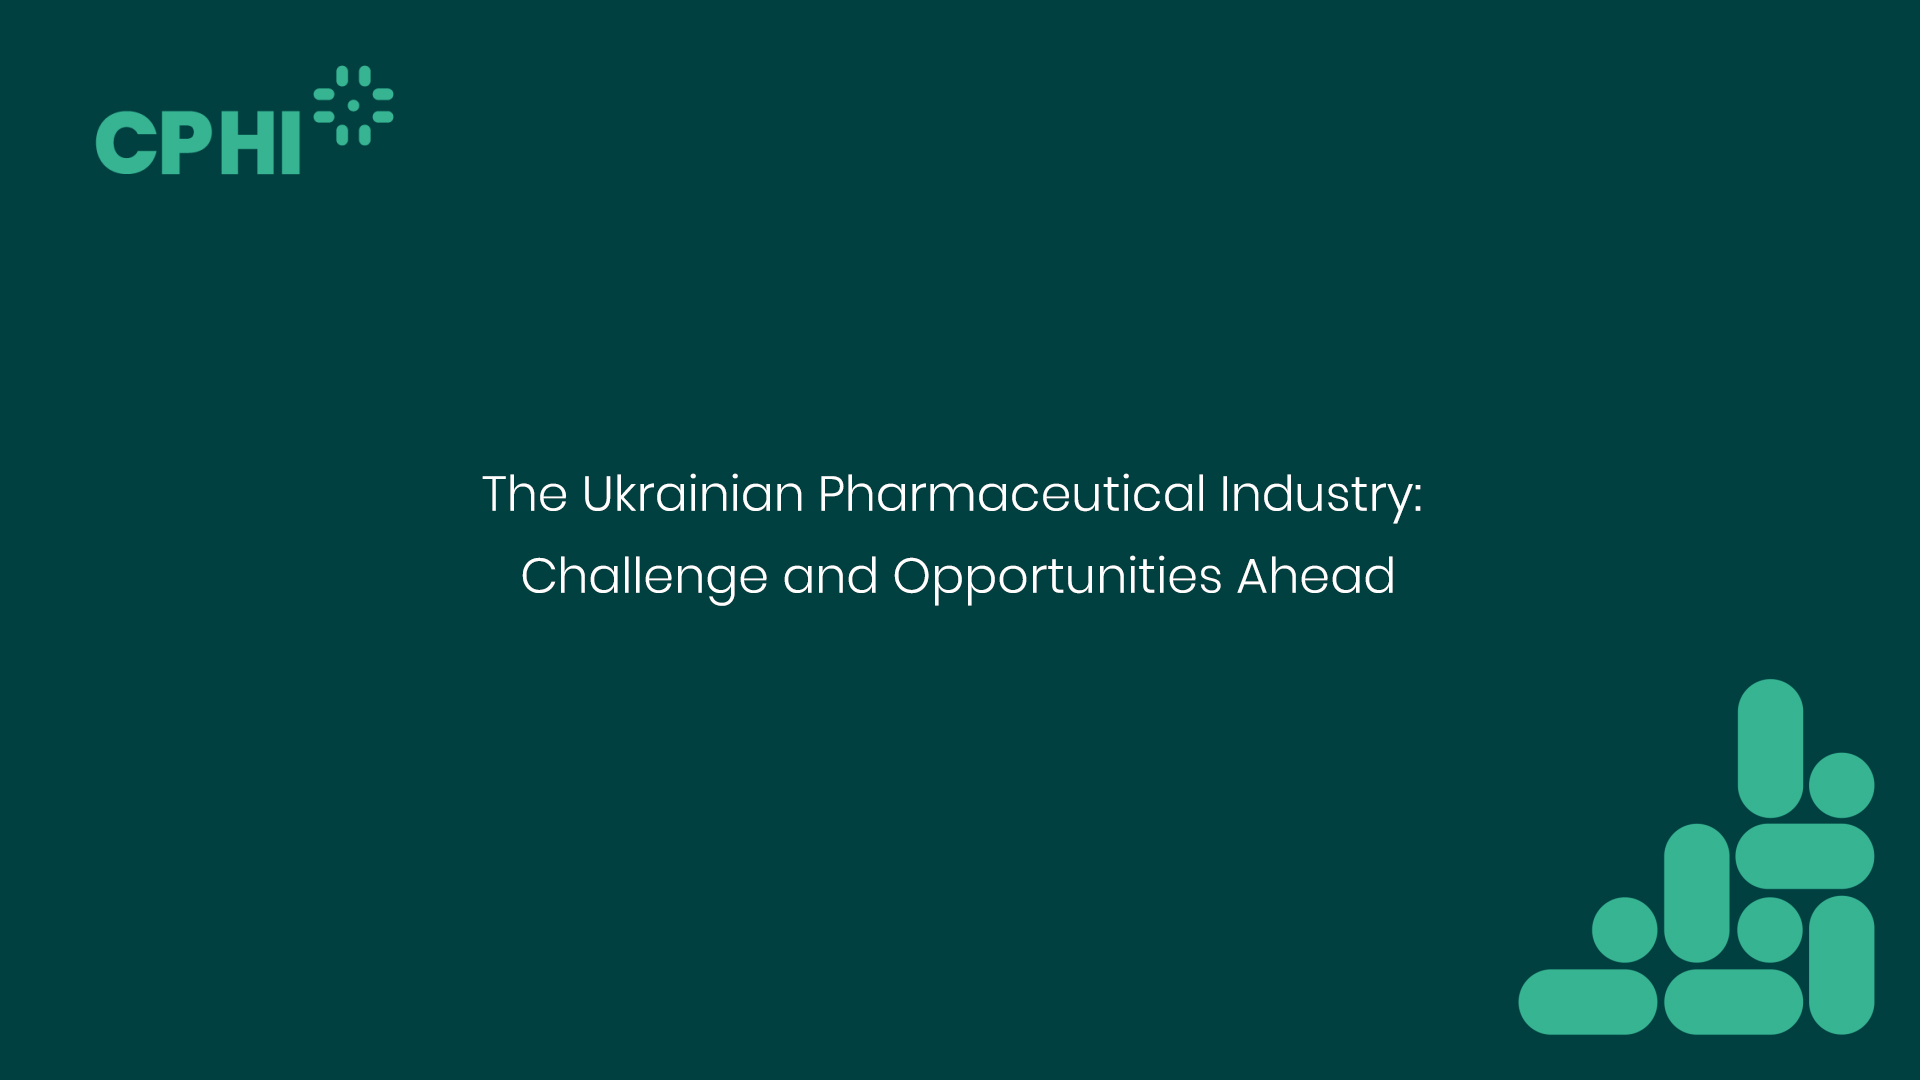 The Ukrainian Pharmaceutical Industry: Challenges and Opportunities Ahead